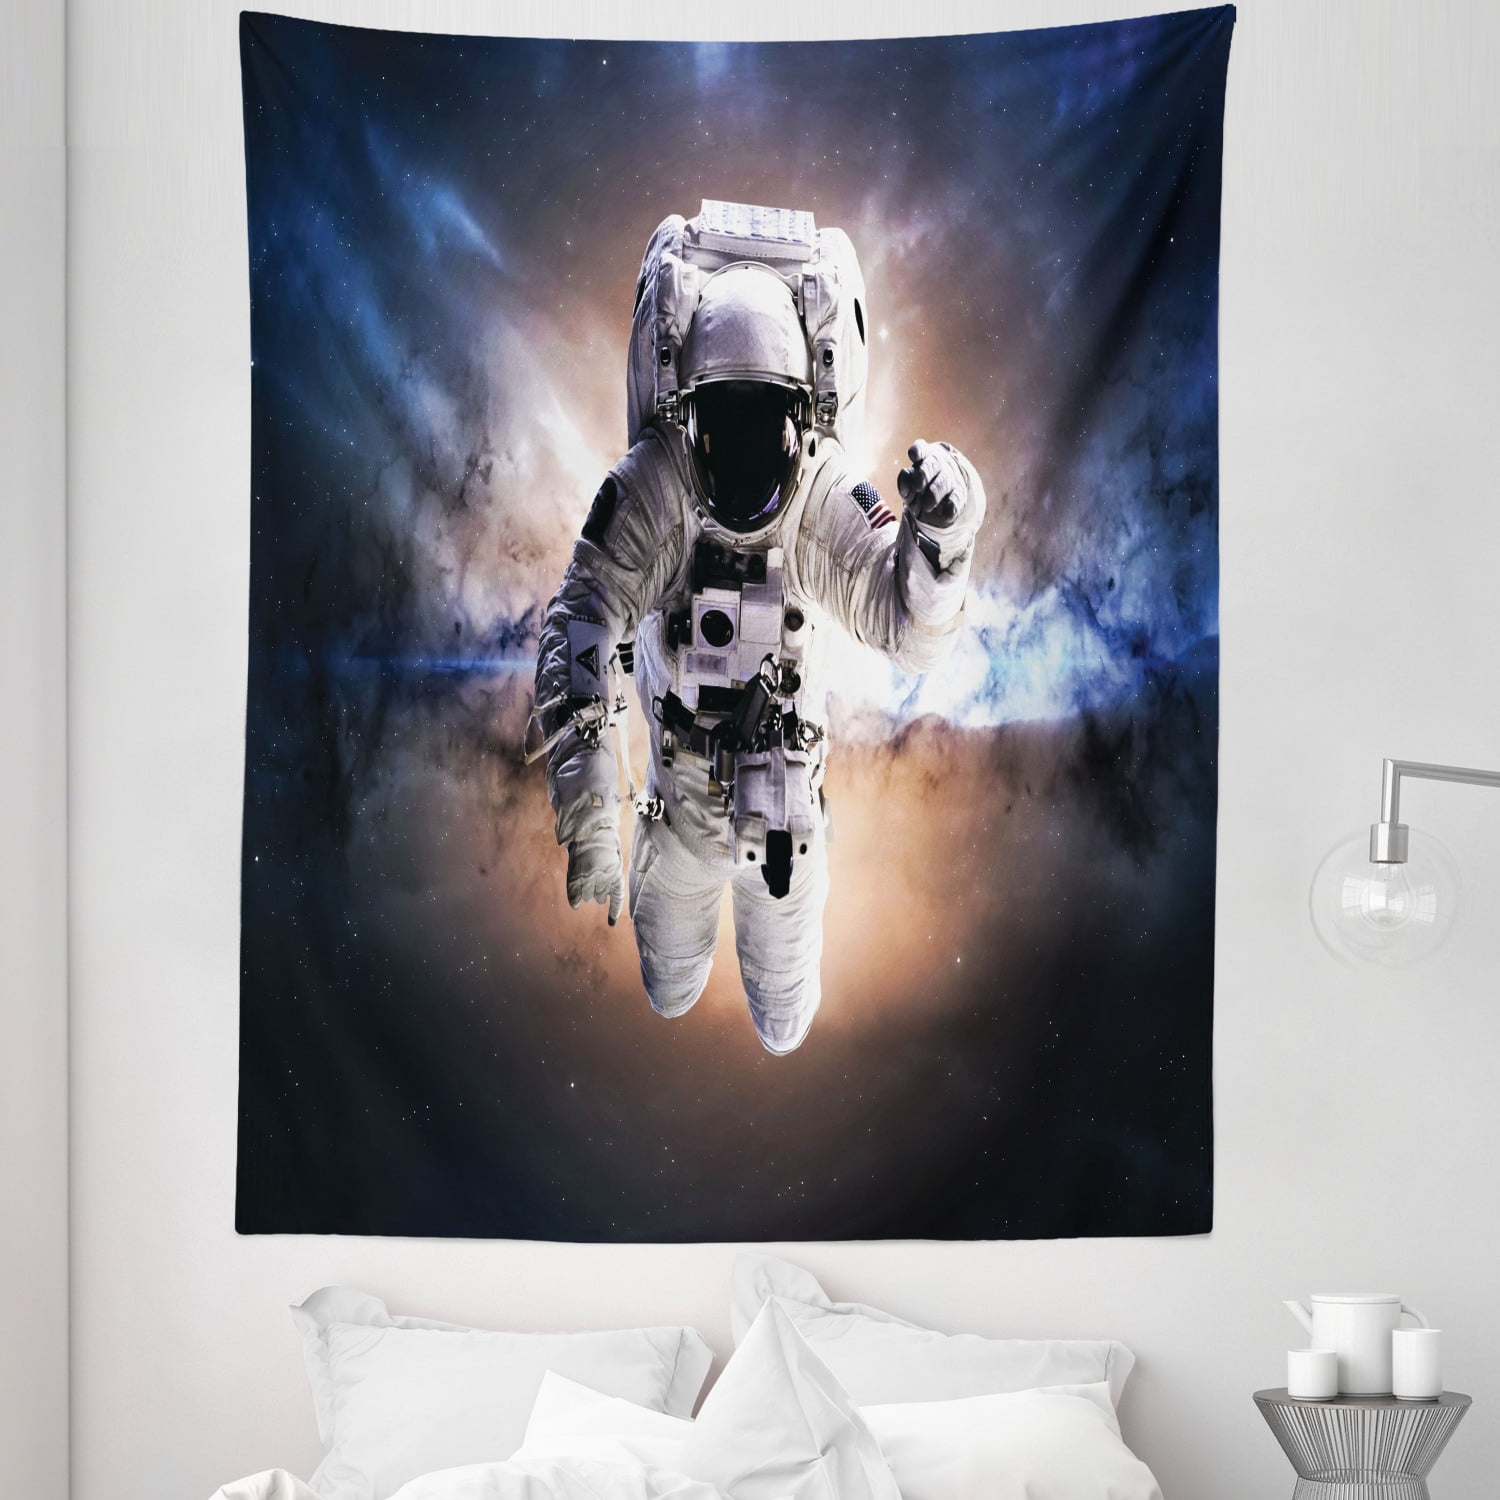 Astronaut Tapestry, Floating Astronaut in Space Nebula Heavenly Bodies Star  Systems Love Science, Fabric Wall Hanging Decor for Bedroom Living Room  Dorm, 5 Sizes, Multicolor, by Ambesonne - Walmart.com